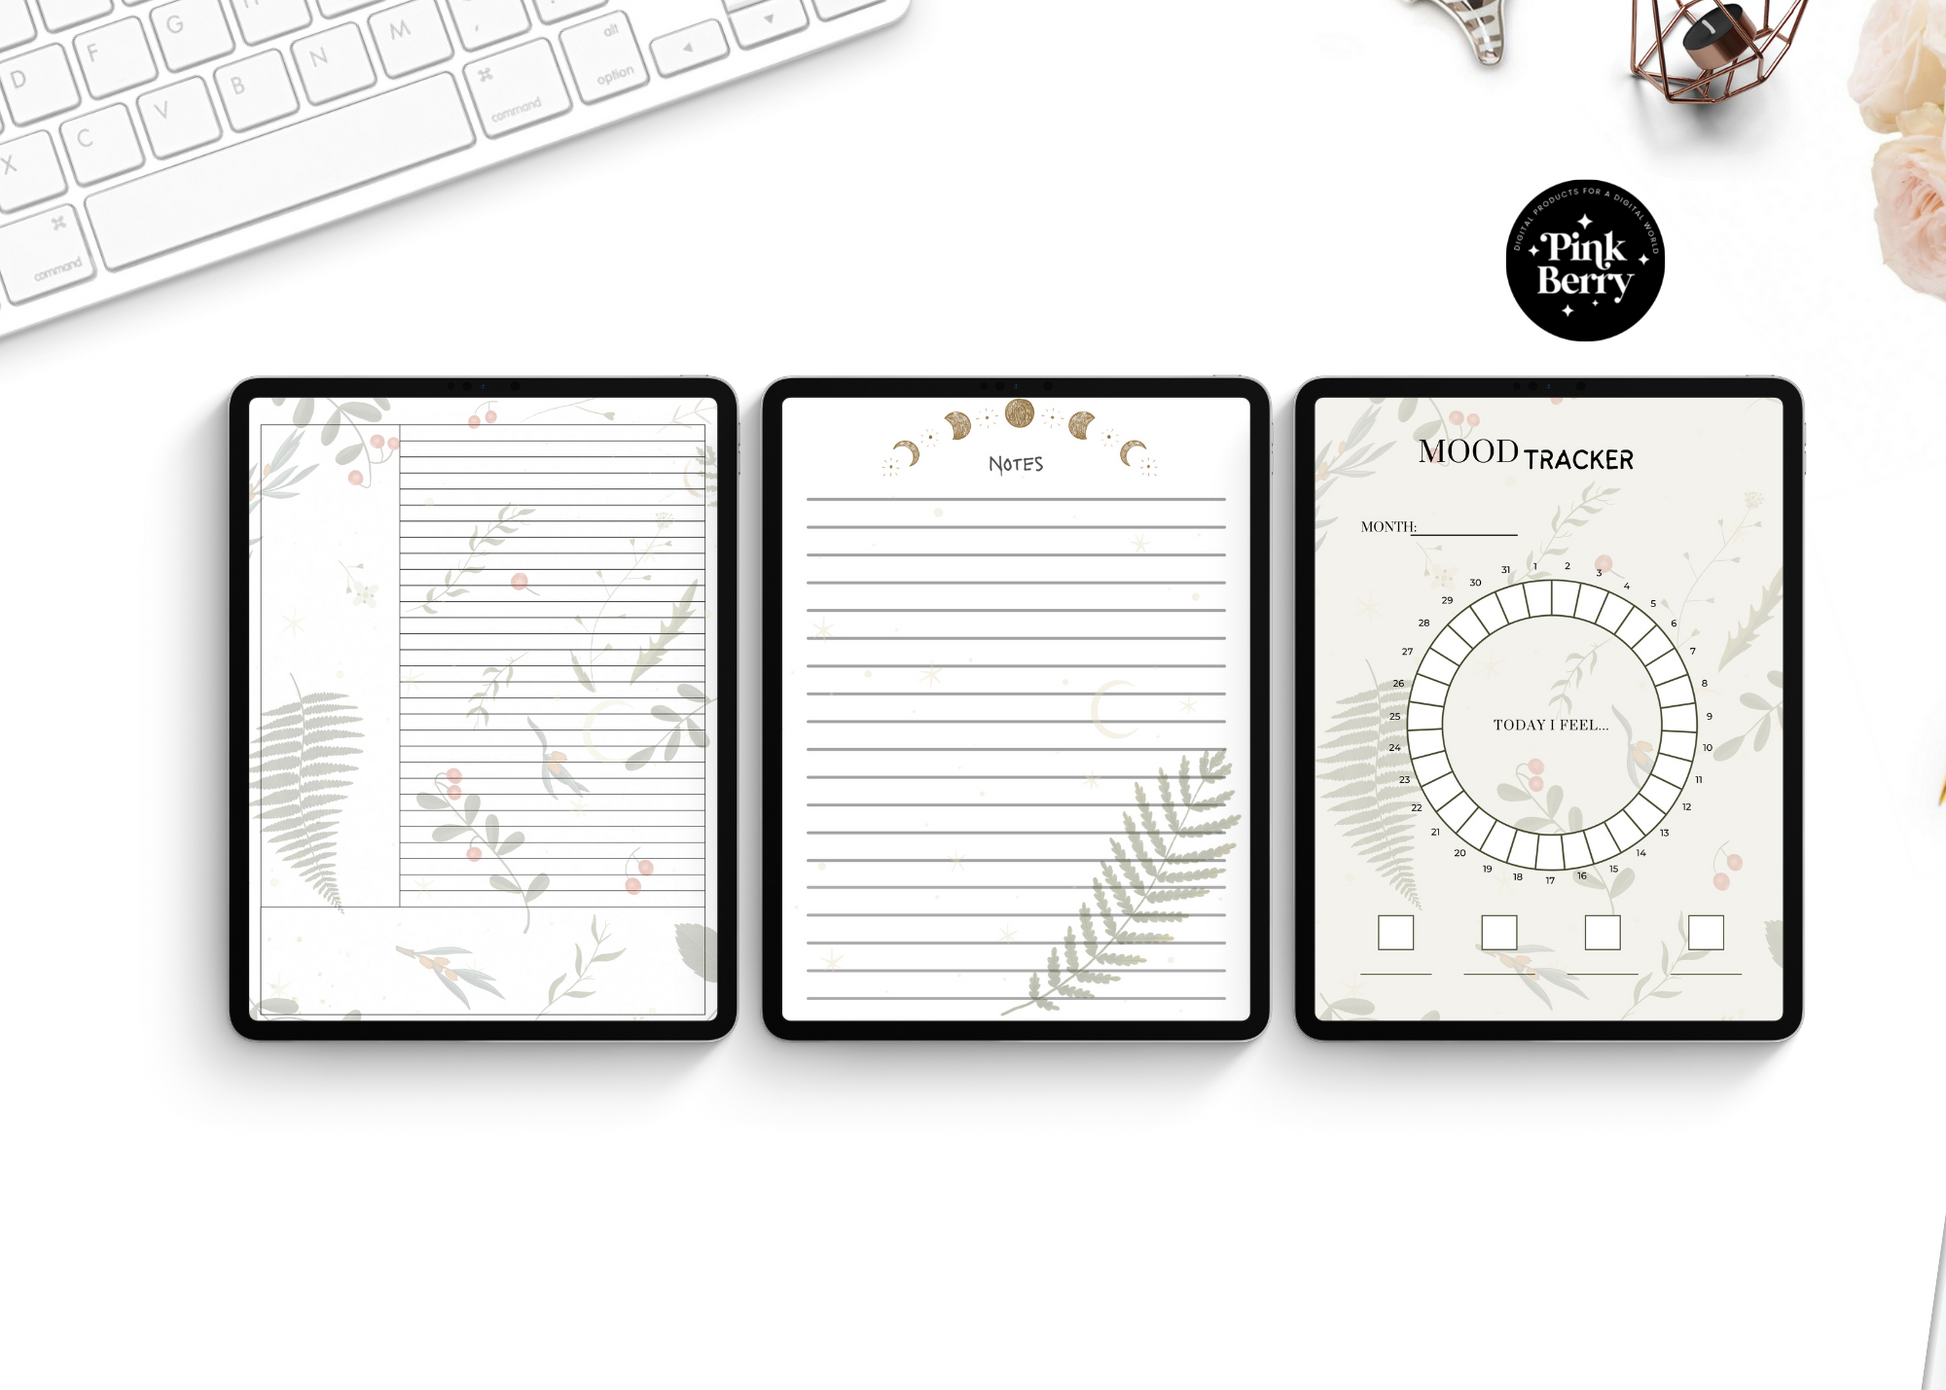 Digital Secrets Journal - 12 Templates | Digital Journal Insets | Digital Diary | Moth Journal- Goodnotes and Notability Inserts